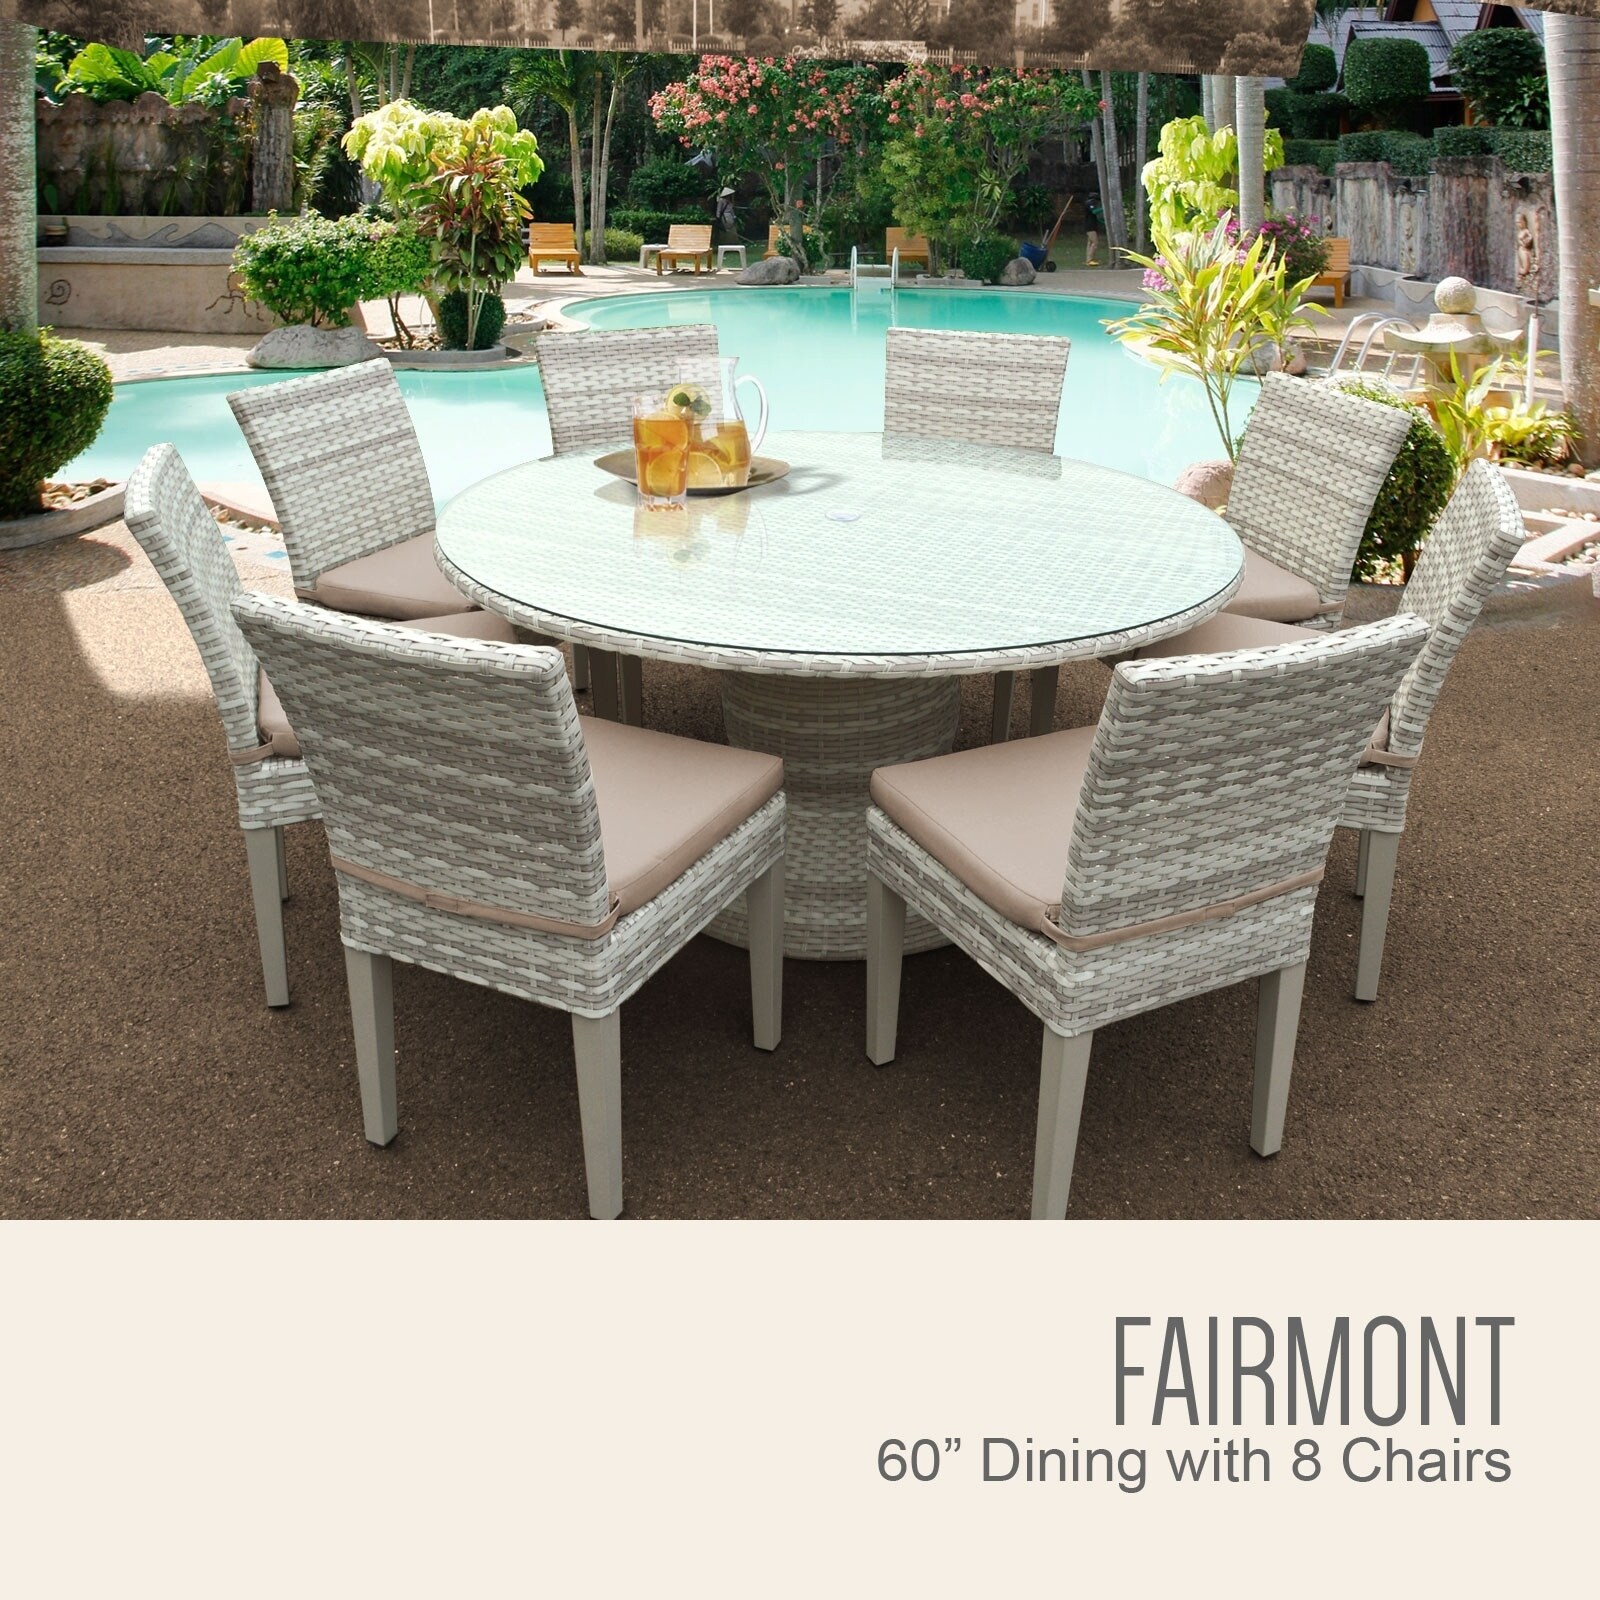 Fairmont 60 Inch Outdoor Patio Dining Table With 8 Armless Chairs